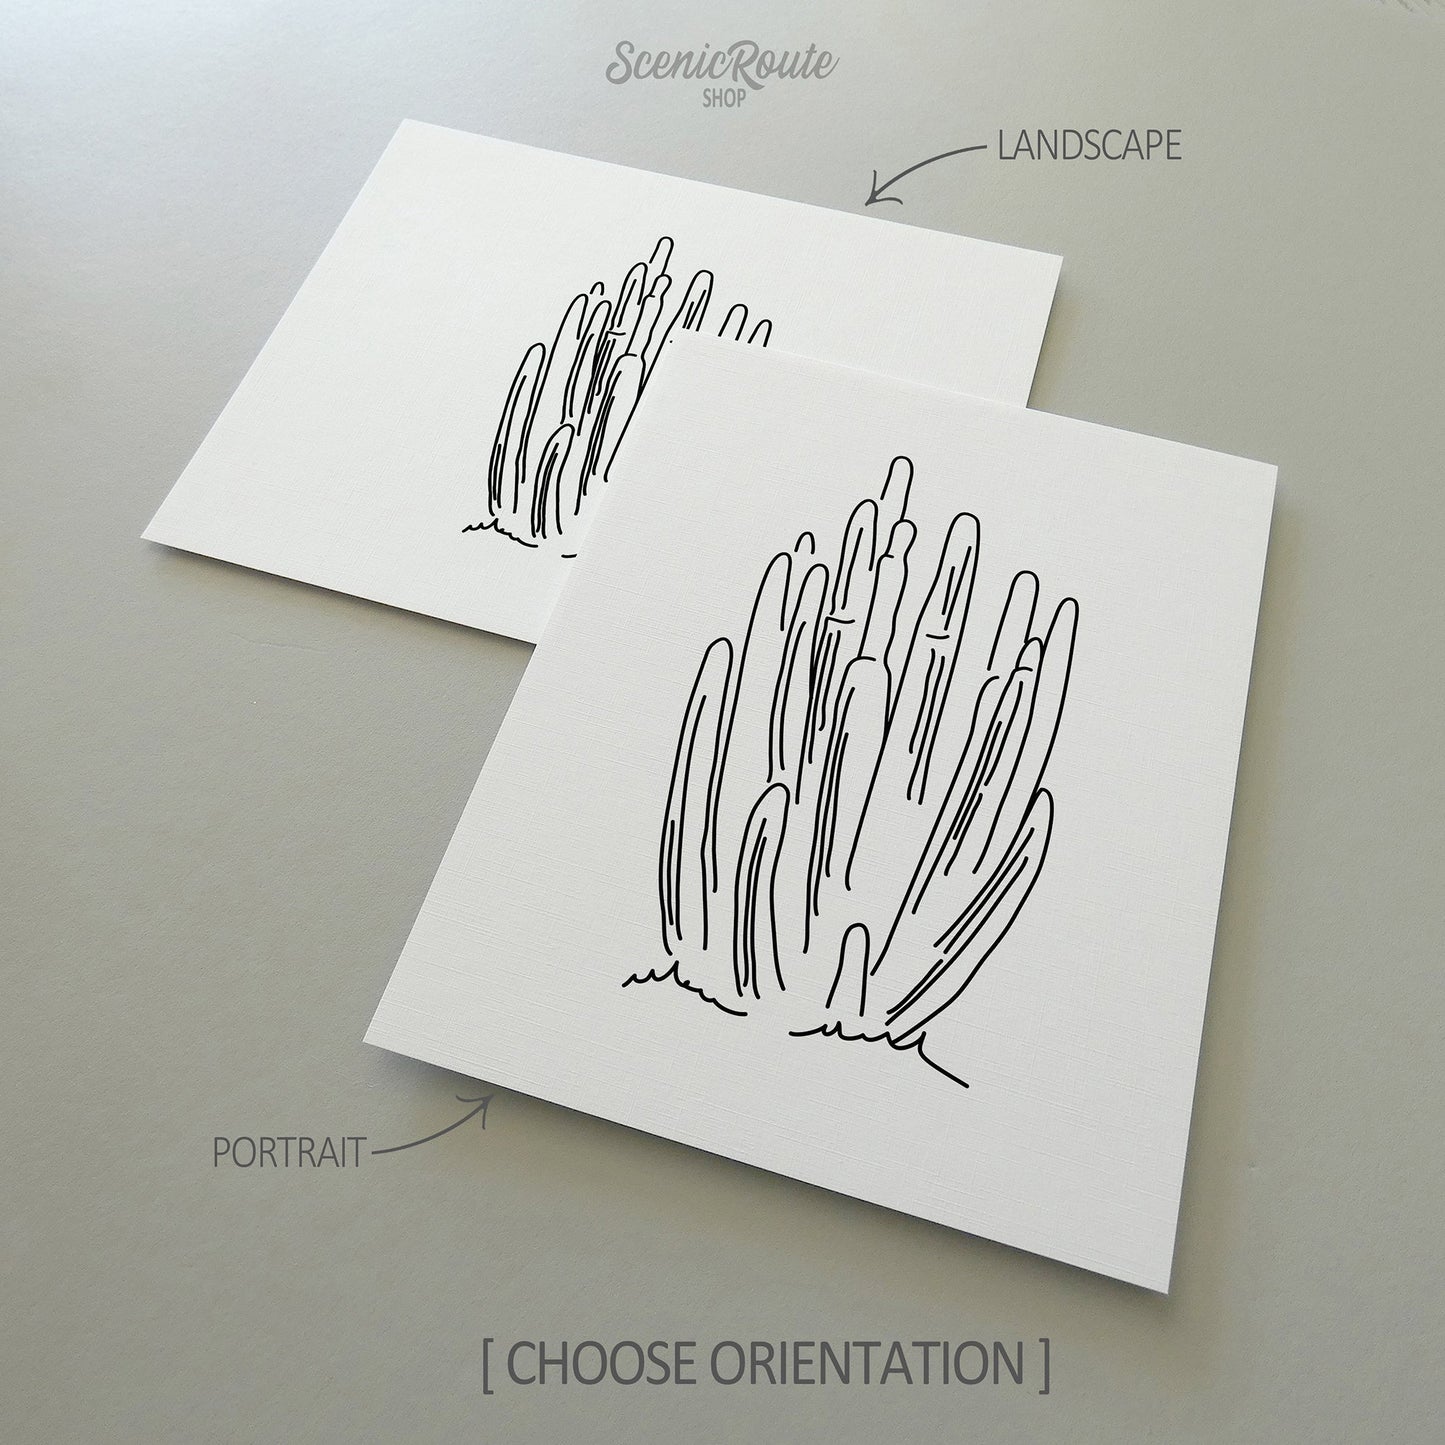 Two line art drawings of a Organ Pipe Cactus on white linen paper with a gray background.  The pieces are shown in portrait and landscape orientation for the available art print options.